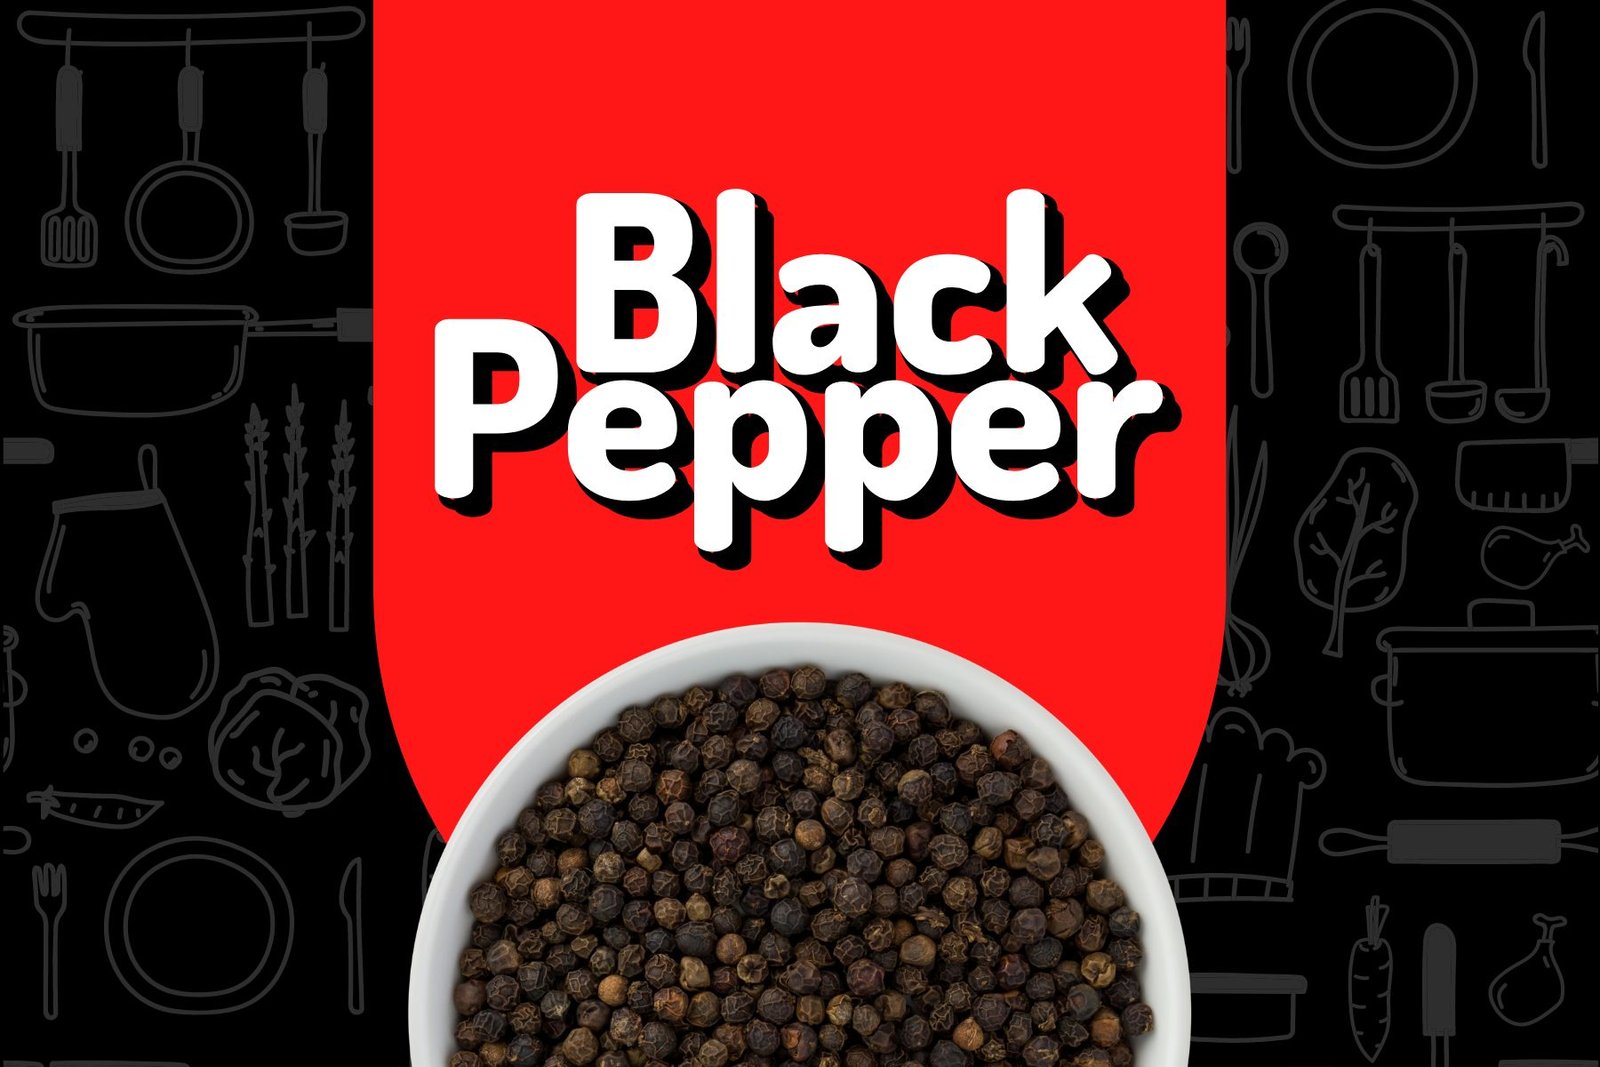 Read more about the article Organic Black Pepper Shopping Offers in Shillong, Meghalaya